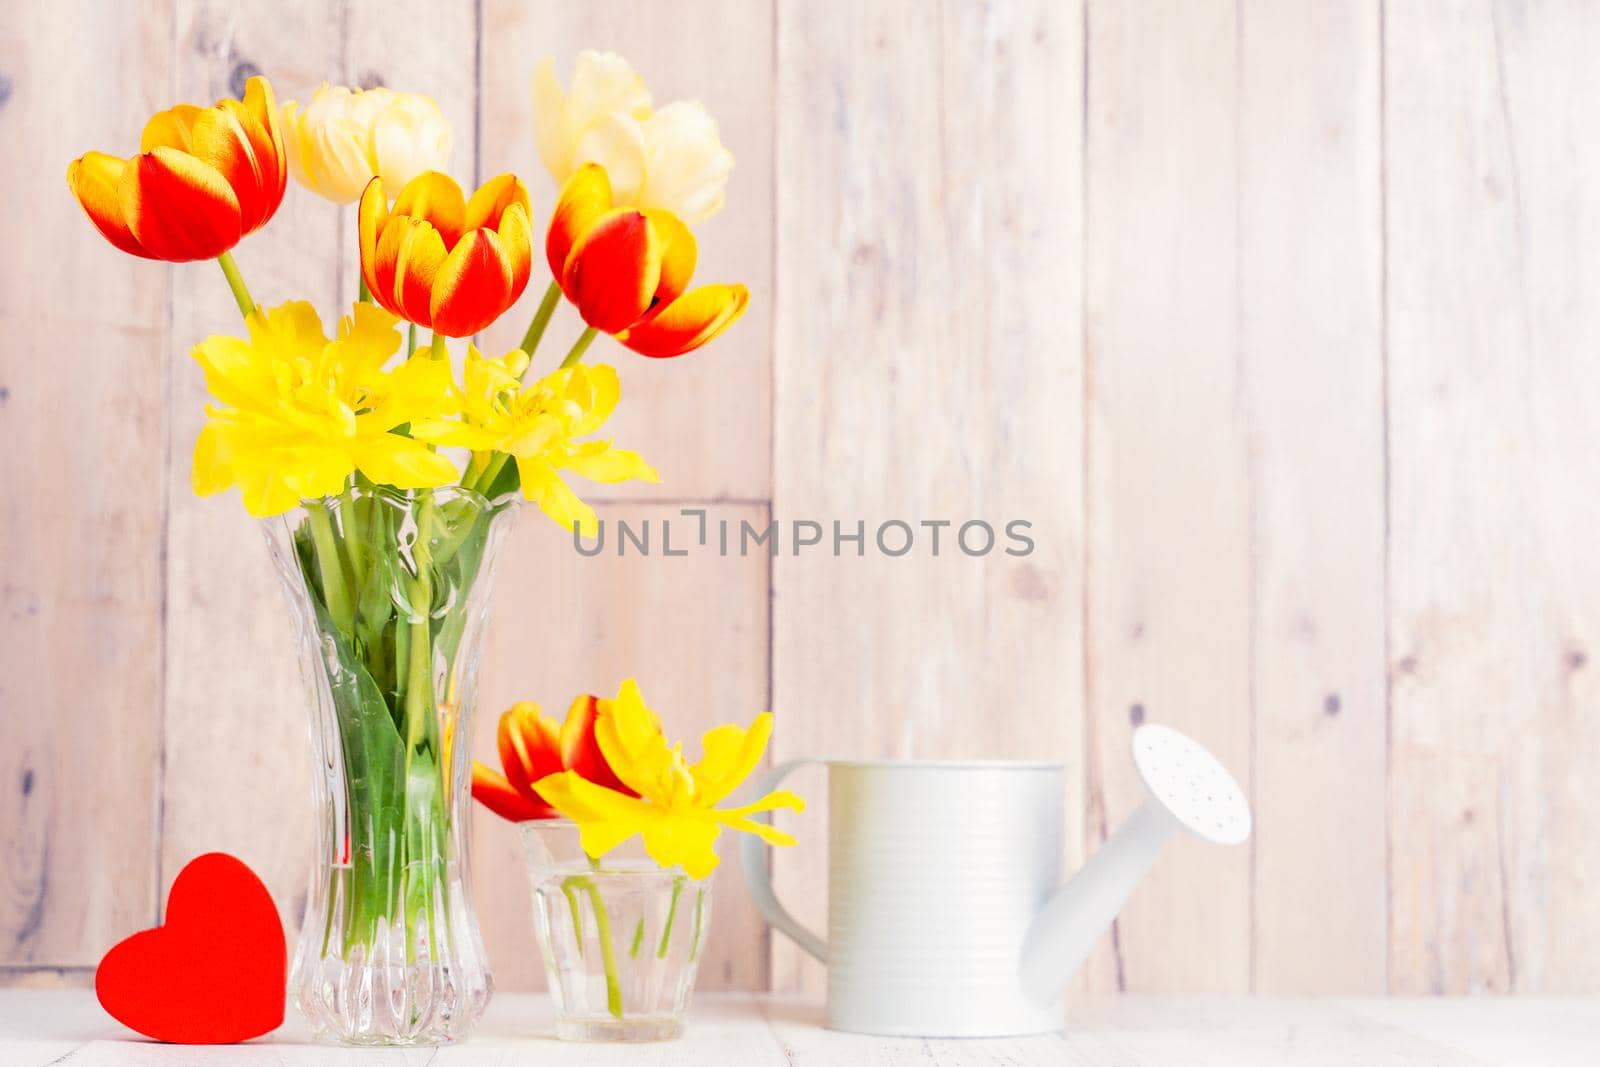 Tulip flower arrangement in glass vase with heart greeting, watering can decor on wooden table background wall, close up, Mother's Day design concept. by ROMIXIMAGE